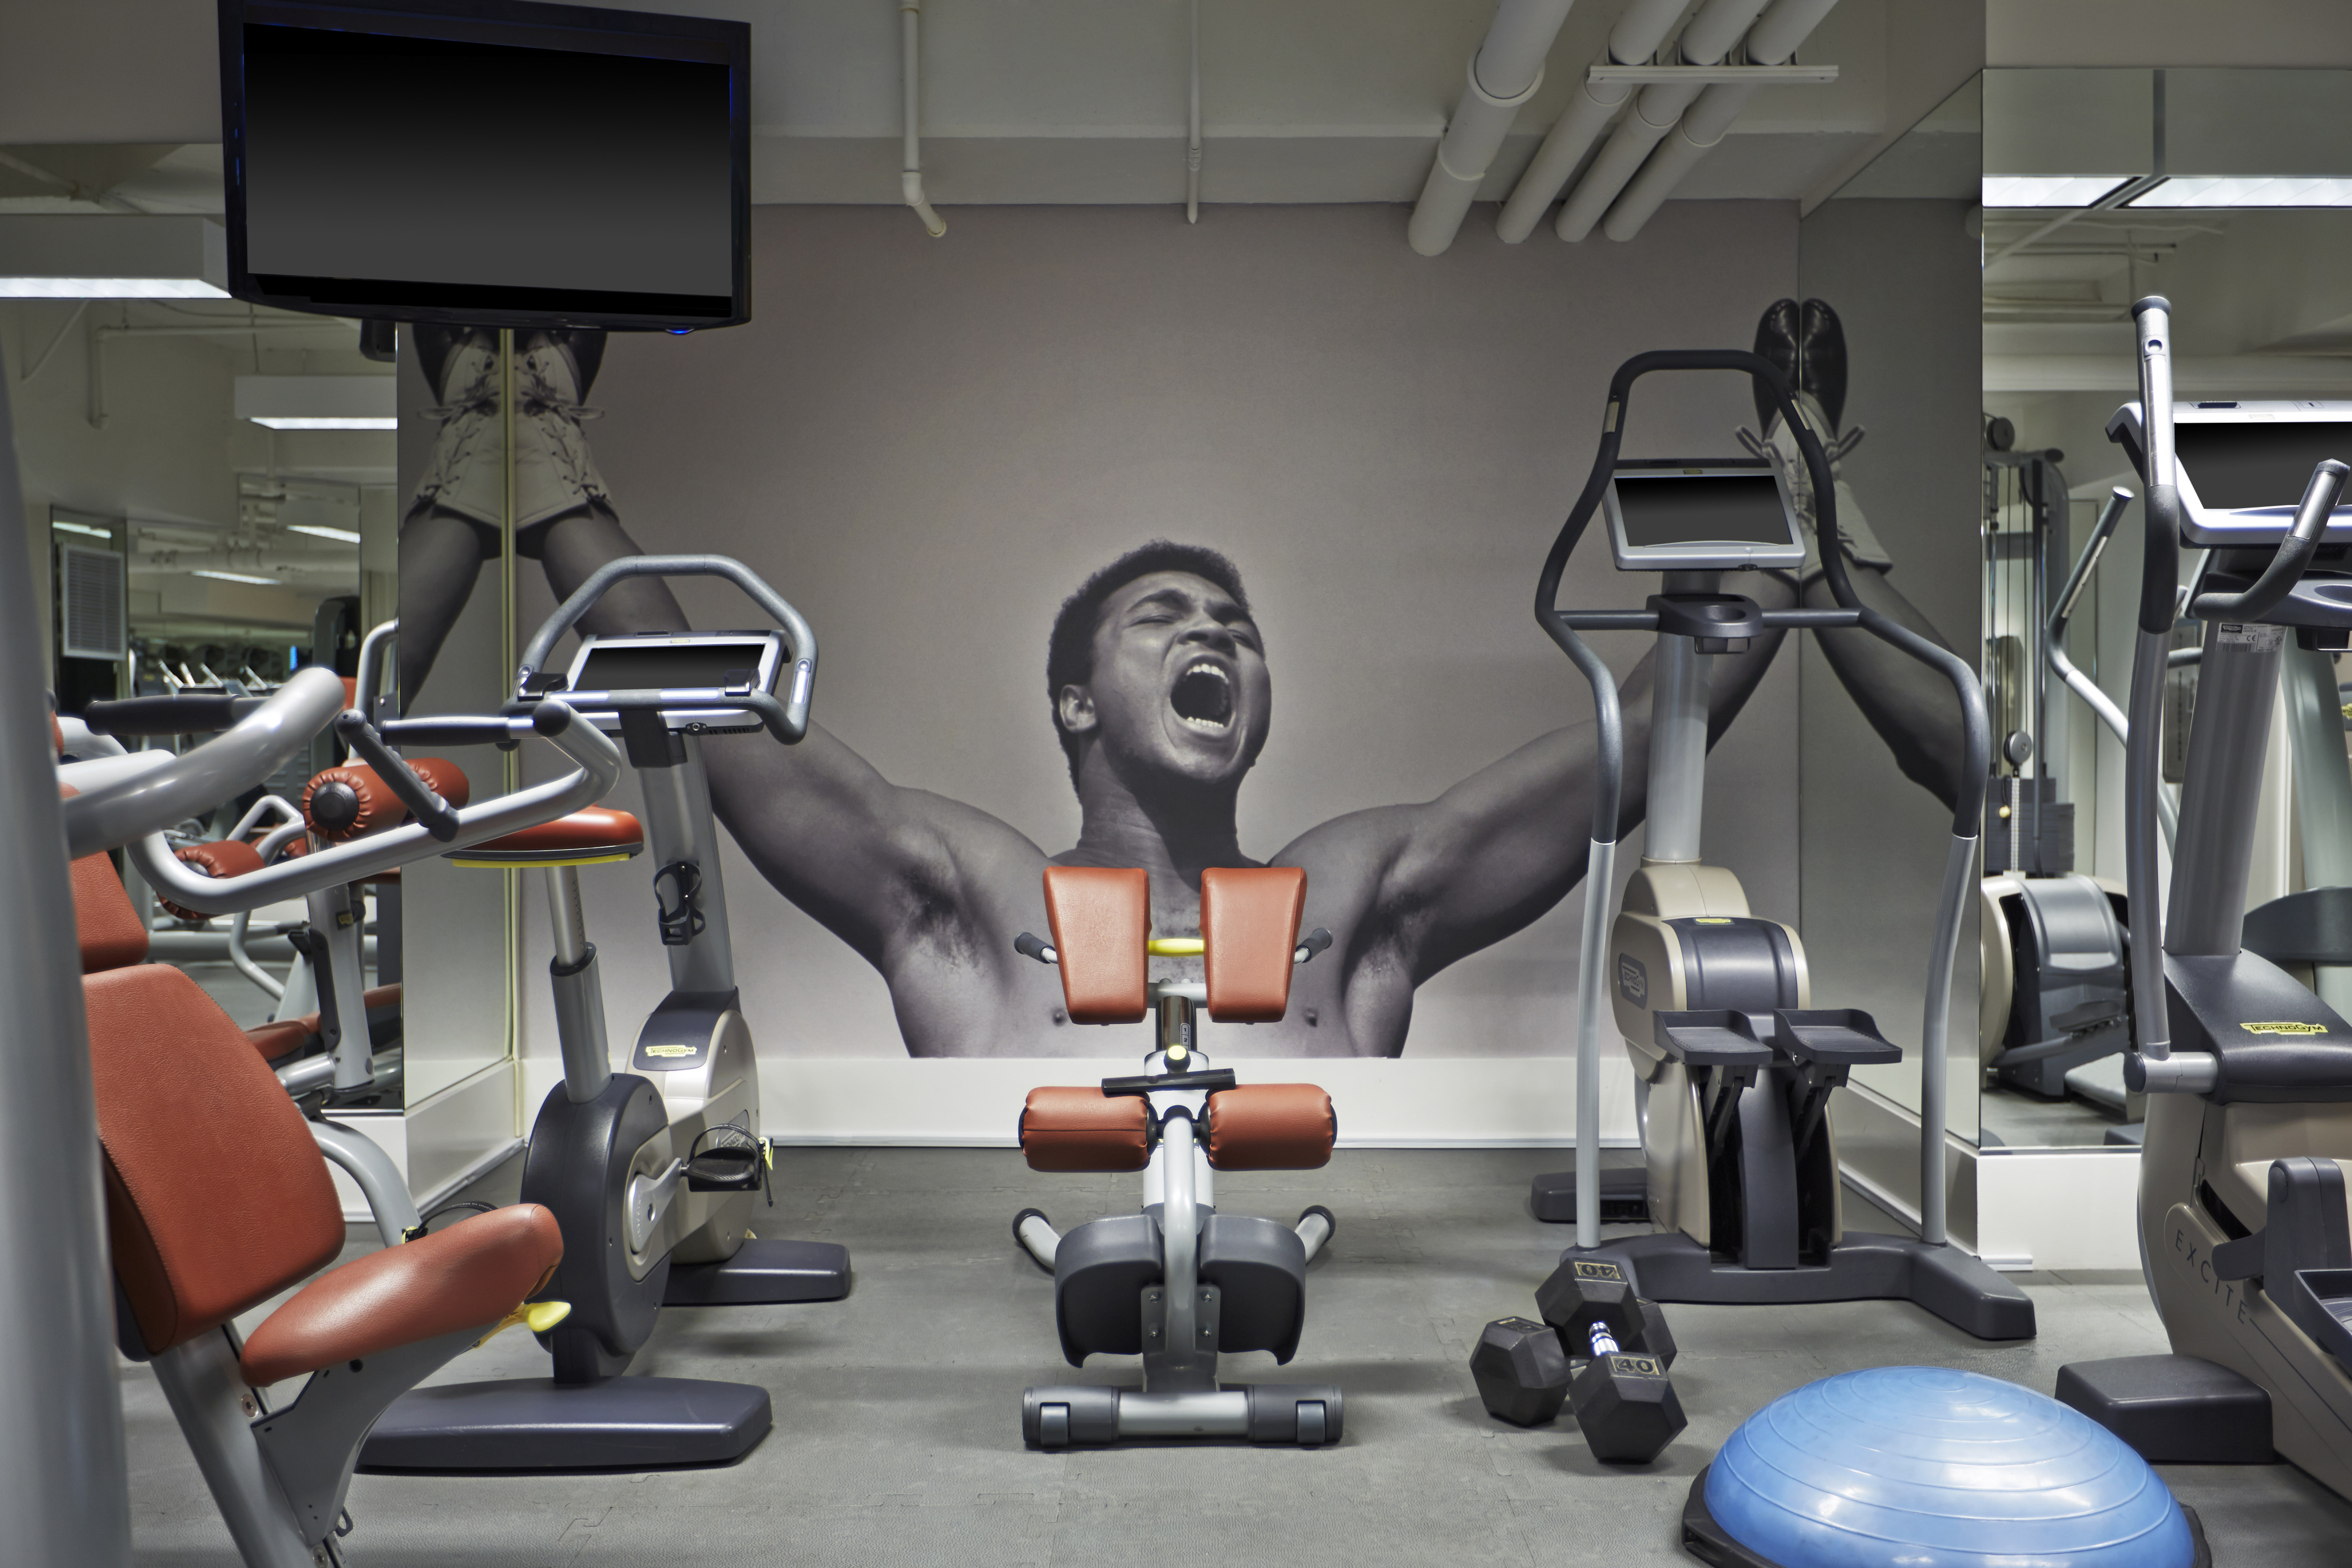 Fitness center with cardio machines, bench and TV